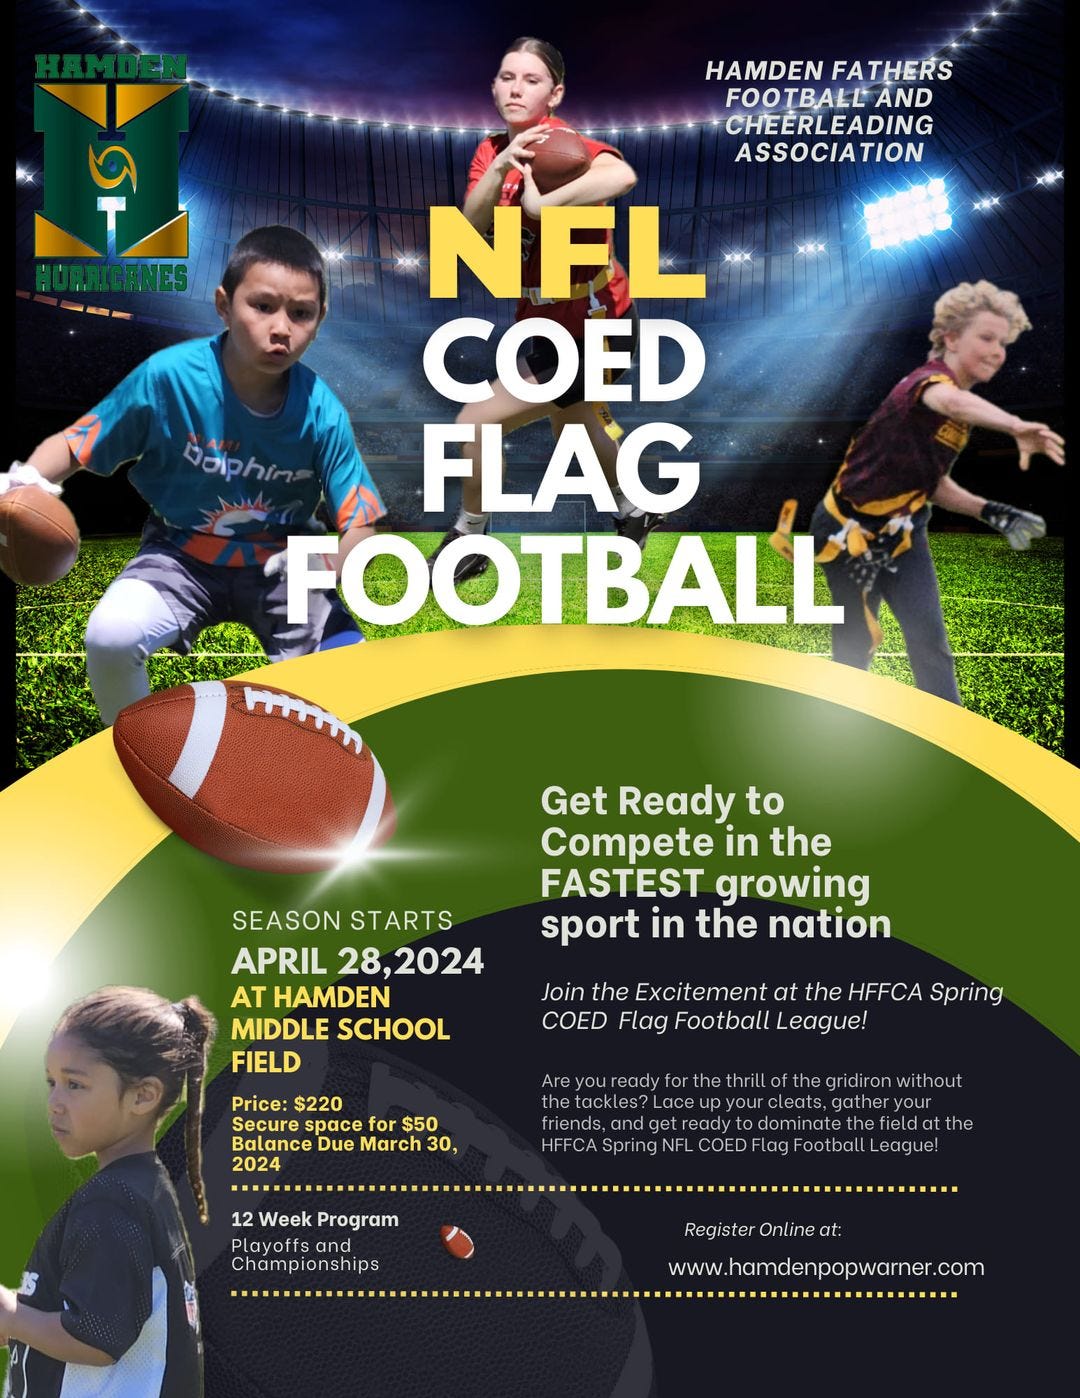 May be a graphic of 4 people, people playing football and text that says 'HAMDEN FATHERS FOOTBALL AND CHEERLEADING ASSOCIATION NFL COED FLAG FOOTBALL Get Ready to Compete in the FASTEST growing sport in the nation SEASON STARTS APRIL 28,2024 HAMDEN MIDDLE SCHOOL FIELD Join the Excitement at the HFFCA Spring COED Flag Football League! Price: $220 Secure space to $50 Balanc Due March 30, 2024 for gridironwithout 12 Week Program Playotsand Championship League! ReisteOnlne www. w.hamdenpopwarner.com'